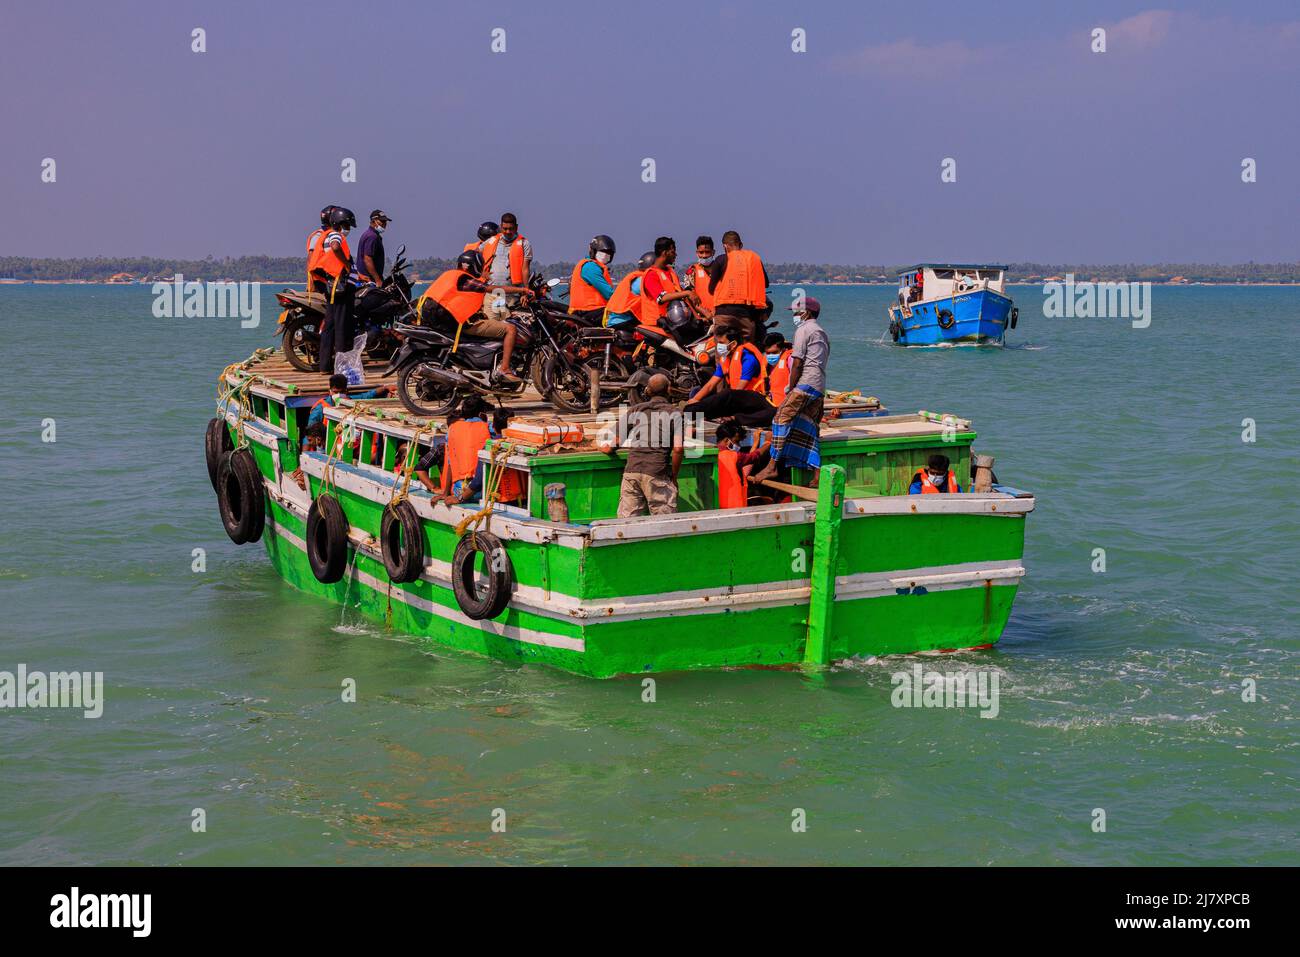 bikers in high viz hang on to their motor bikes on the roof of the ferry on a calm sea from punkudativu island jaffna peninsula sri lanka Stock Photo